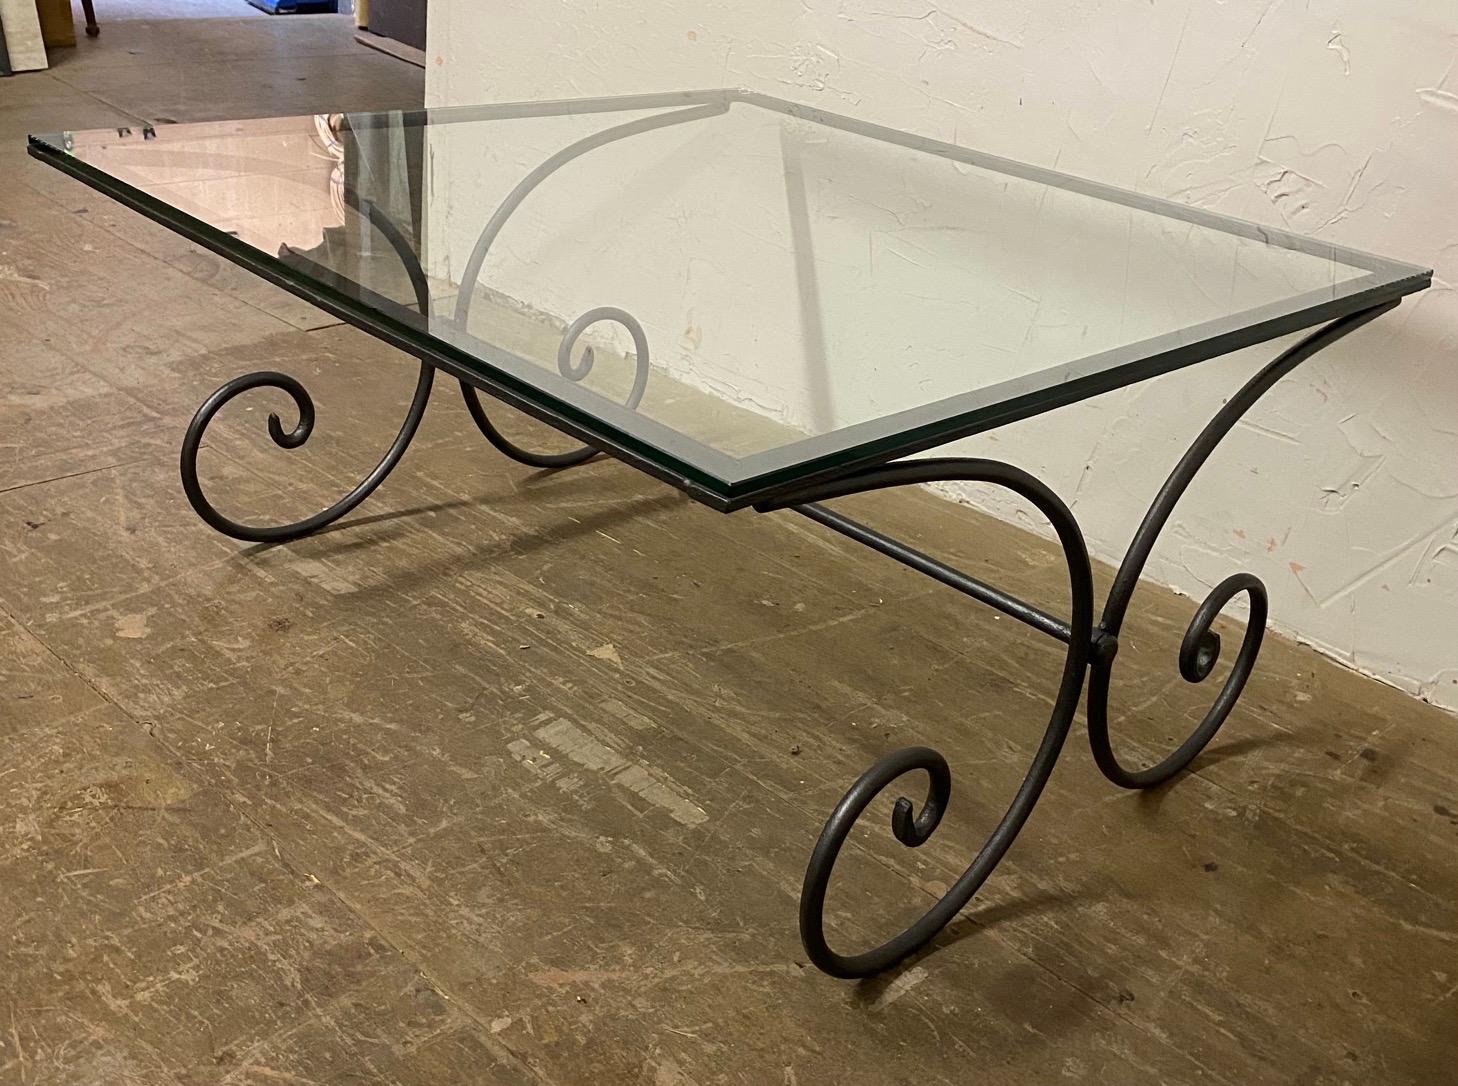 French coffee table with glade top and wrought Iron base. This coffee table can be used indoors or outdoors.
Great simple and elegant style makes it easy to use in almost any decor.
 